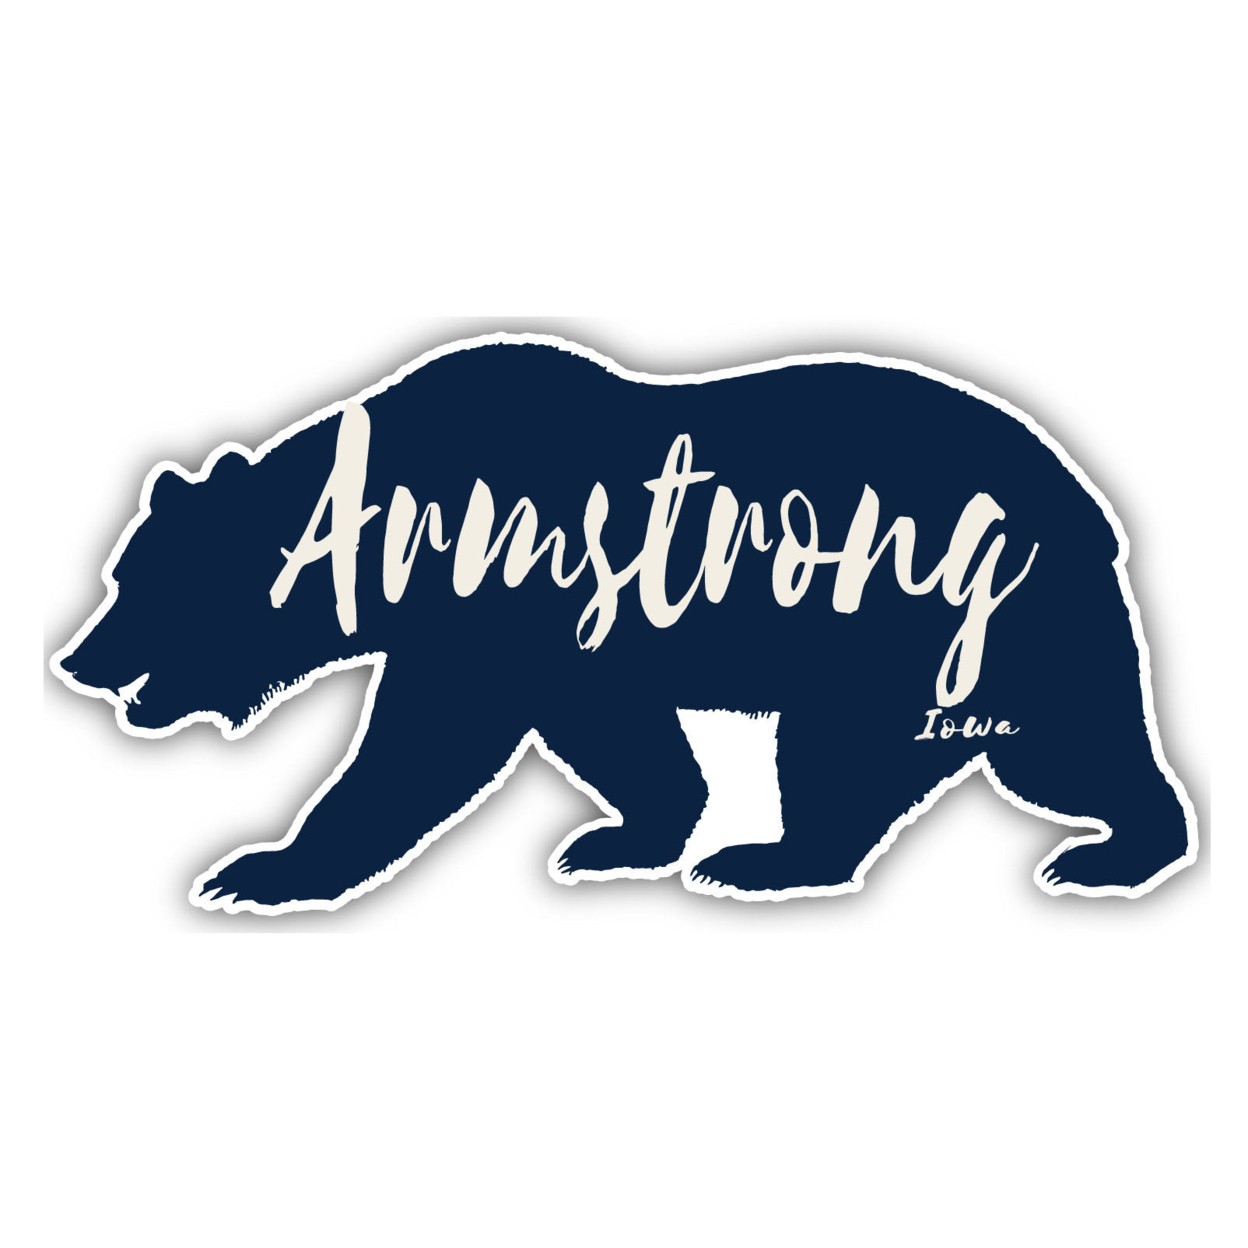 Armstrong Iowa Souvenir Decorative Stickers (Choose Theme And Size) - Single Unit, 8-Inch, Bear